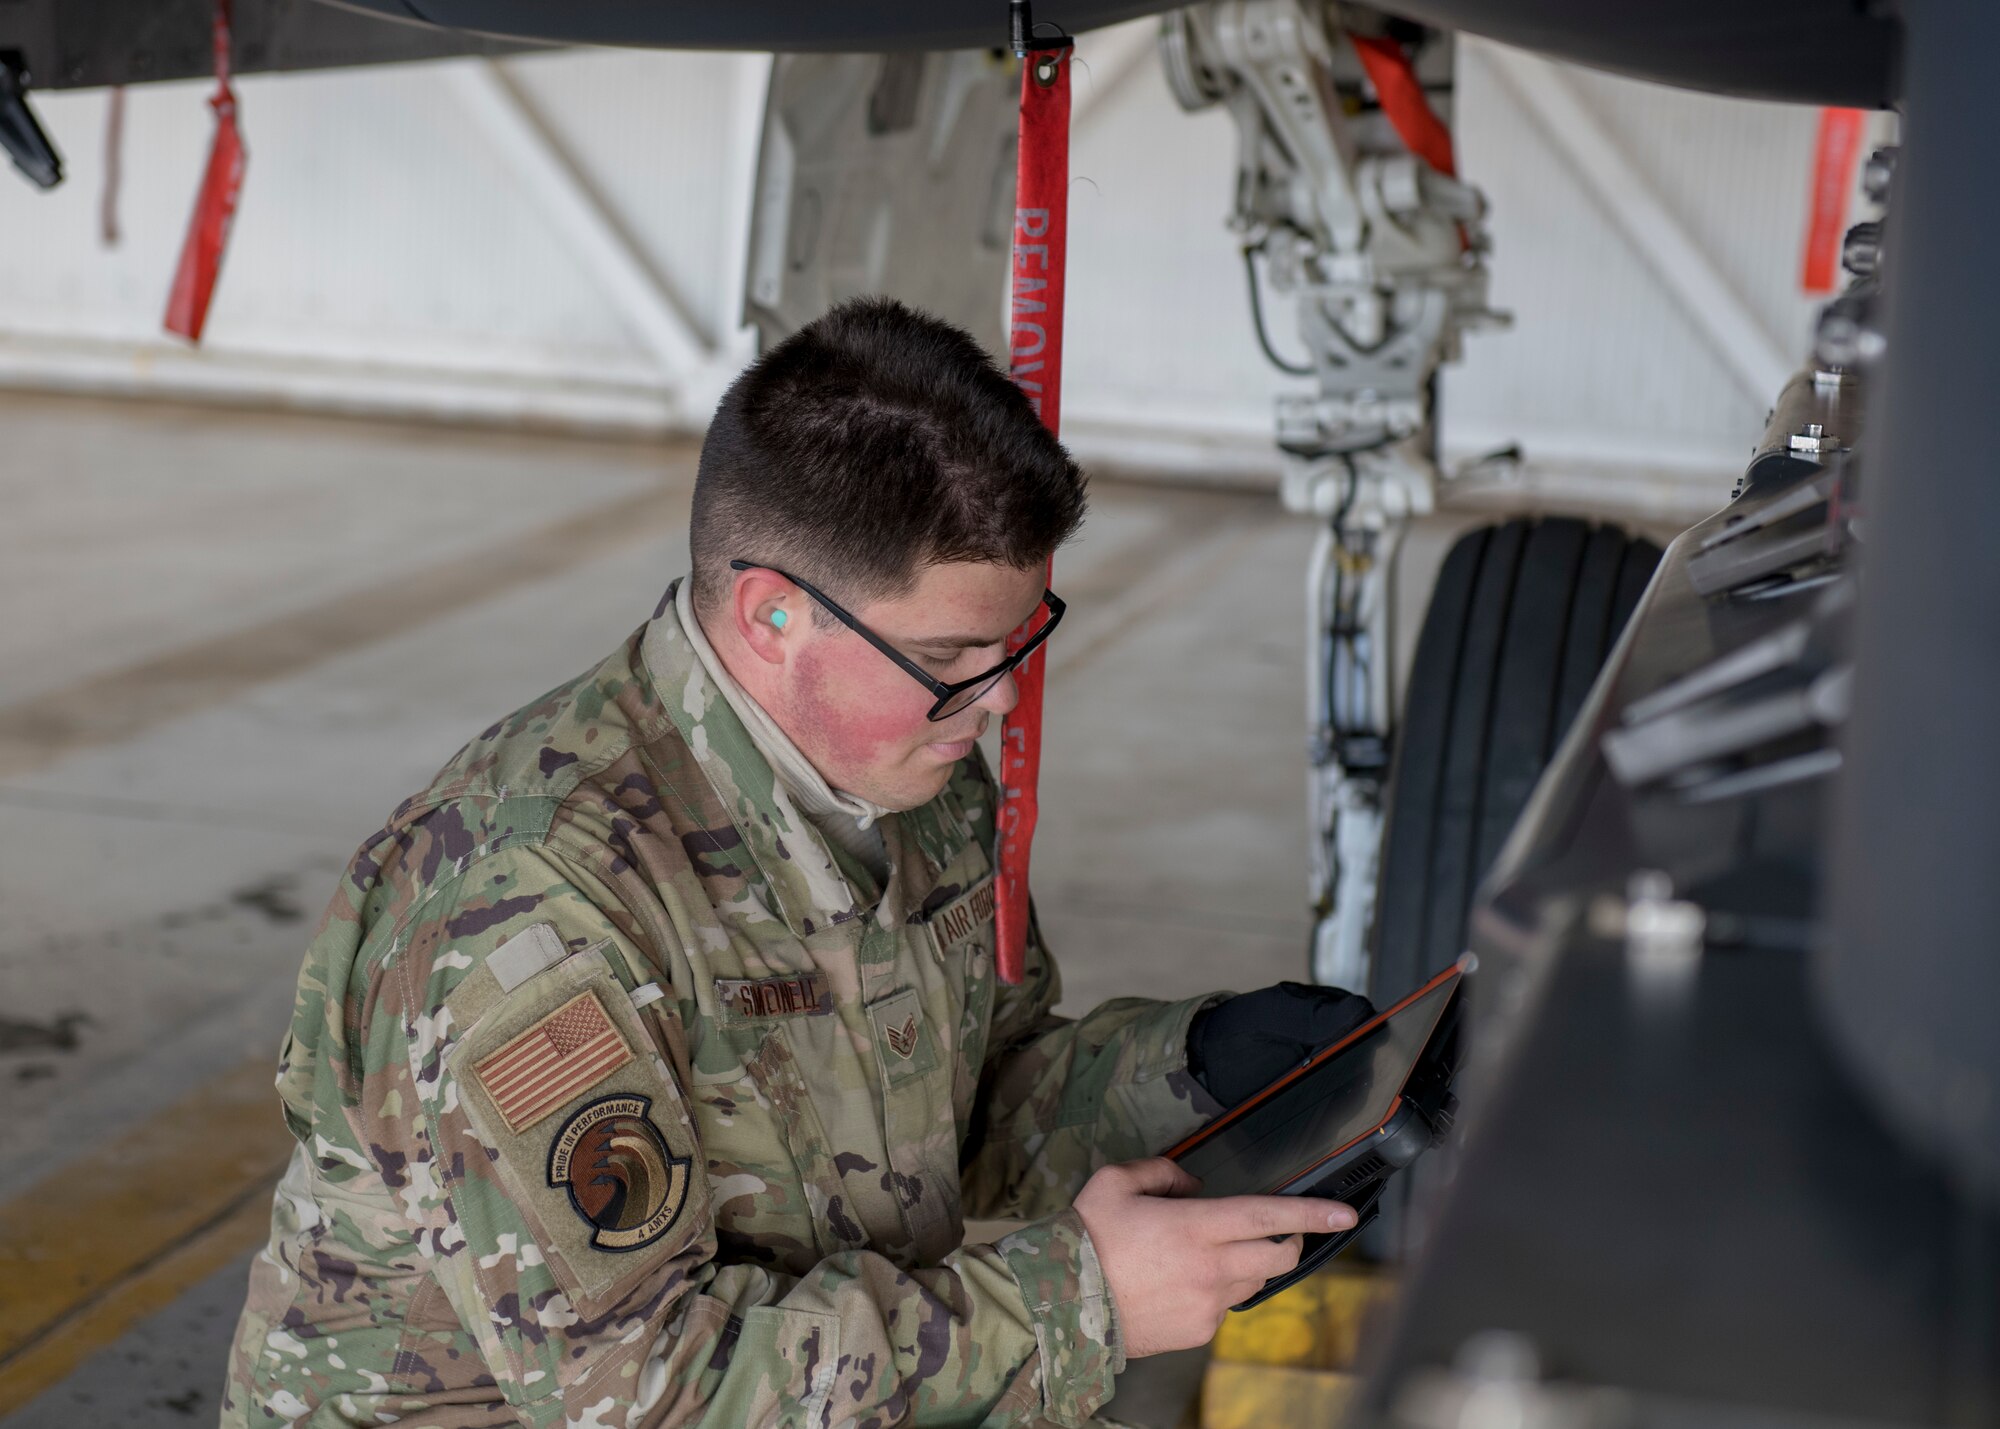 Weapons load crew members train to earn initial certification